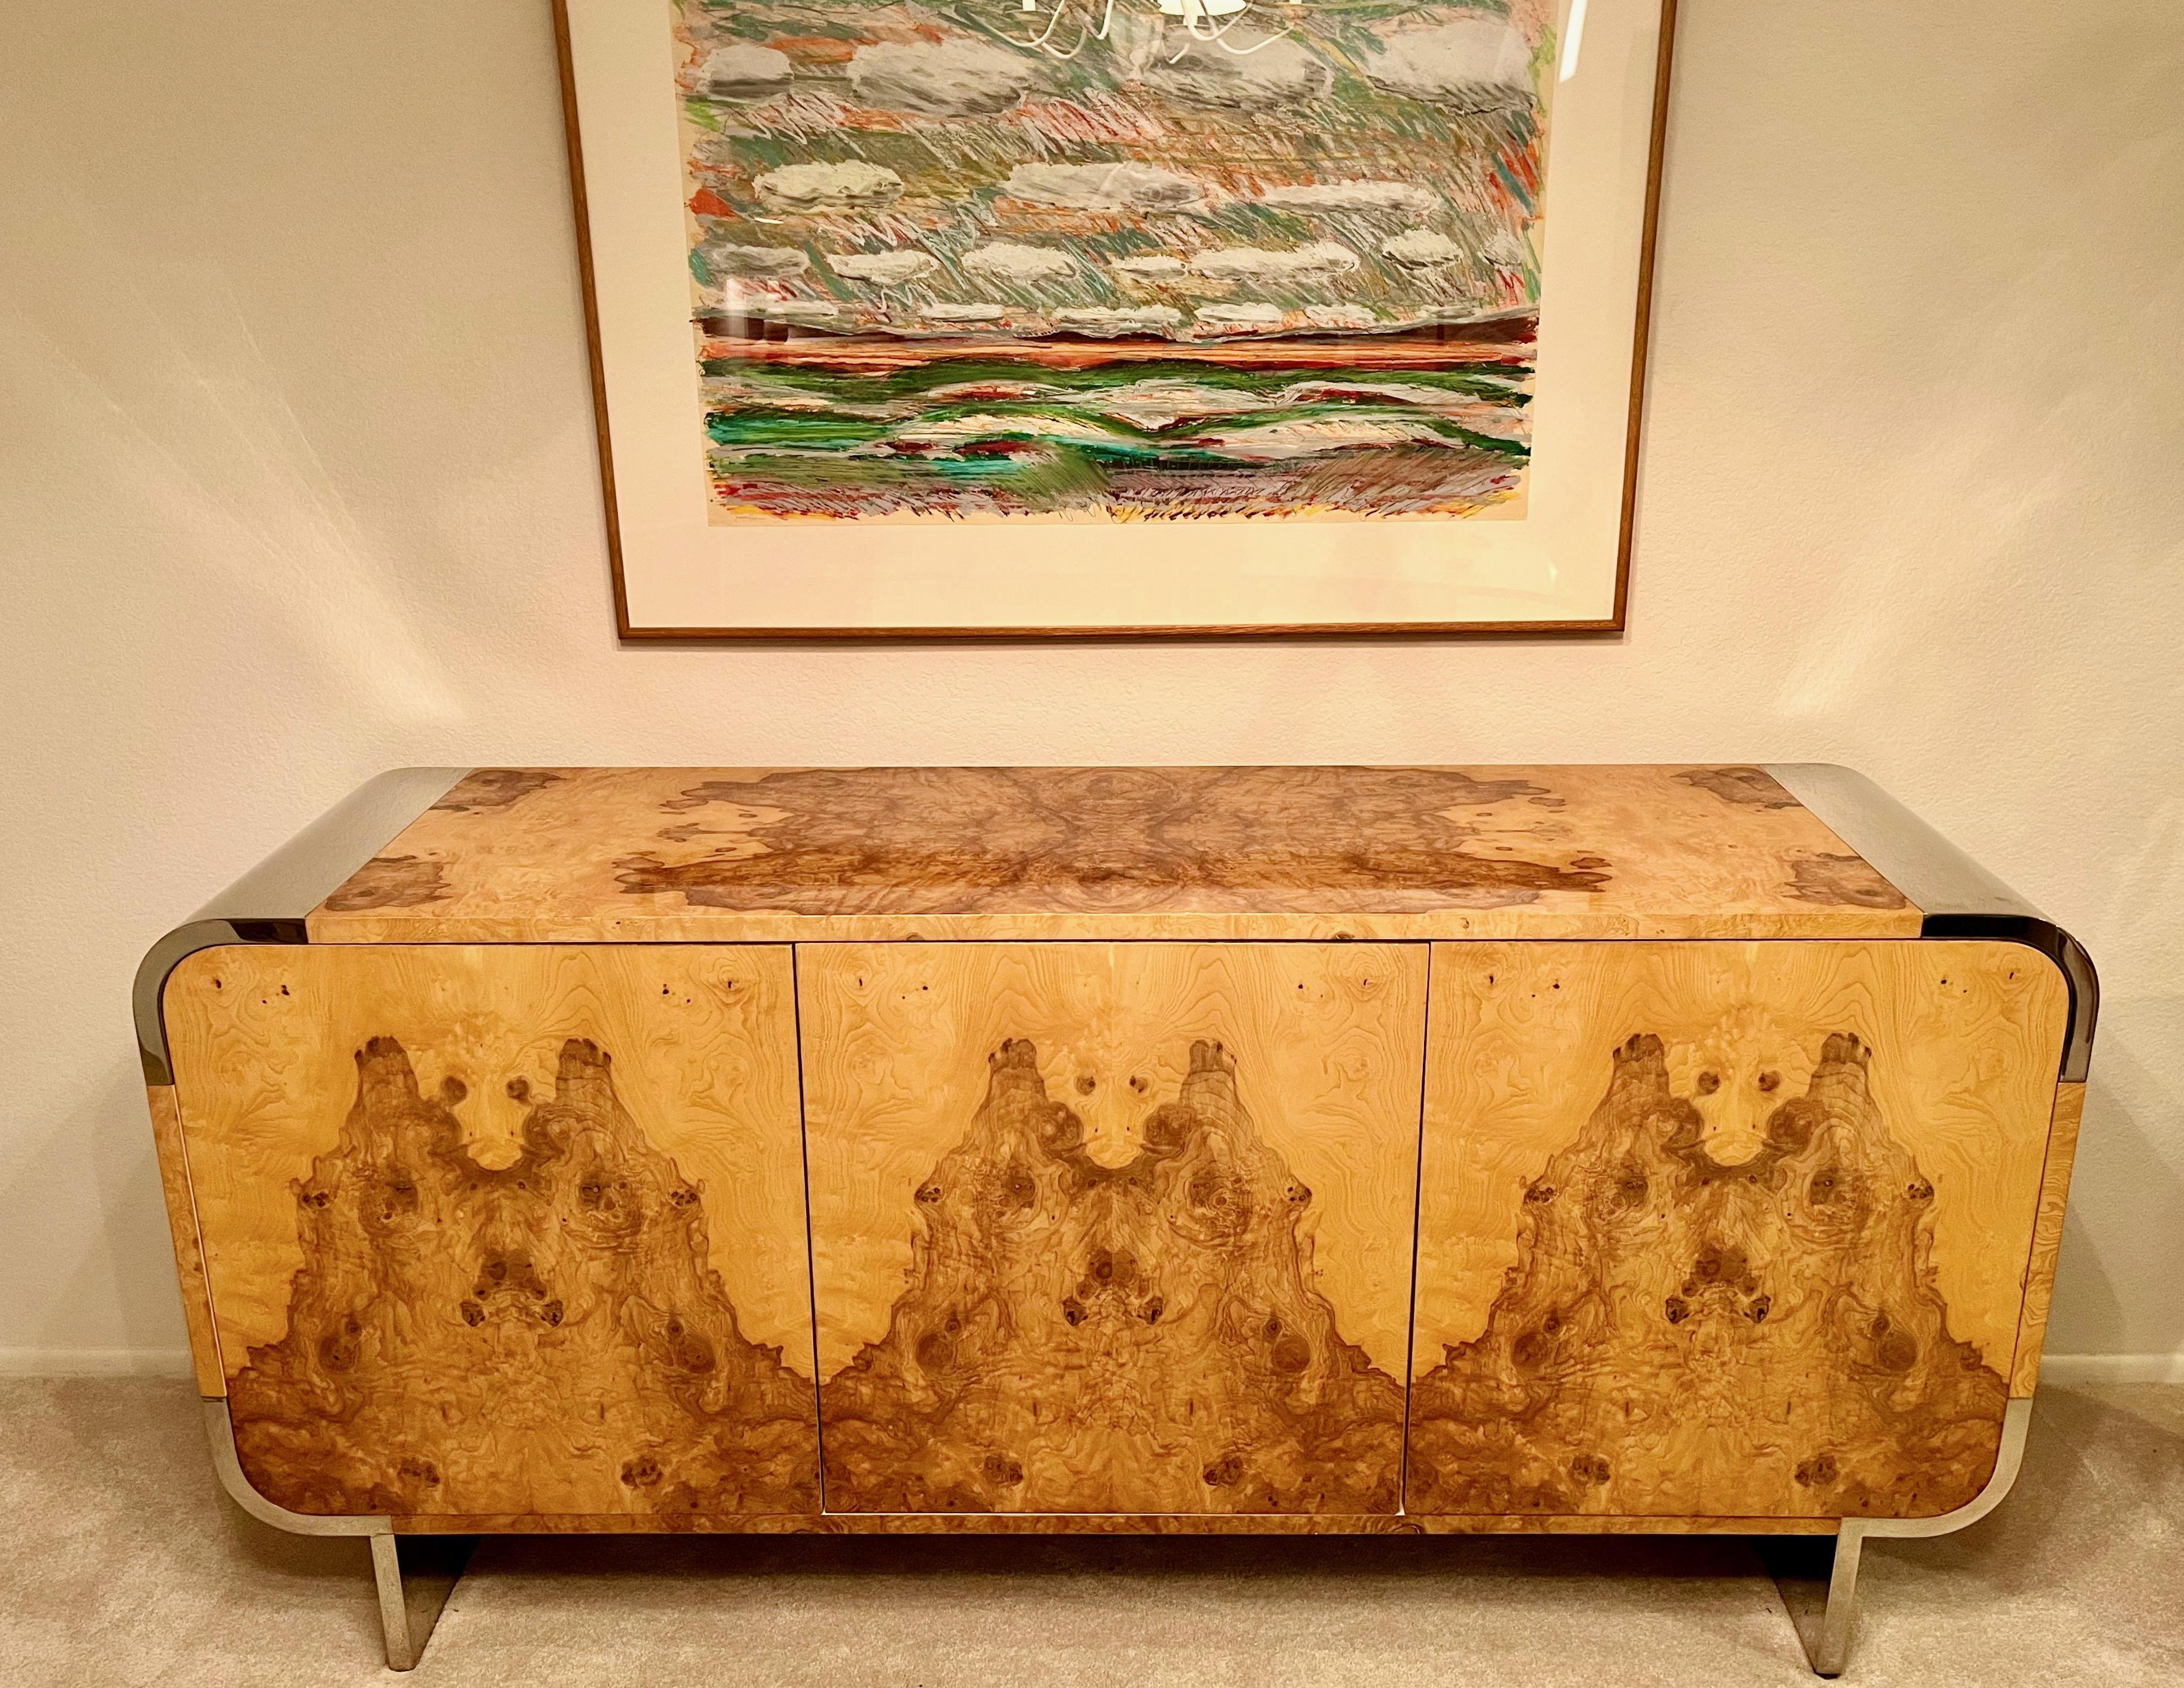 Pace Collection olive burl model 8800 sideboard designed by Irving Rosen.
Measures: 74 inches long x 19 inches deep x 35.5 inches high.
Mirror polished stainless steel radial corners and legs (7